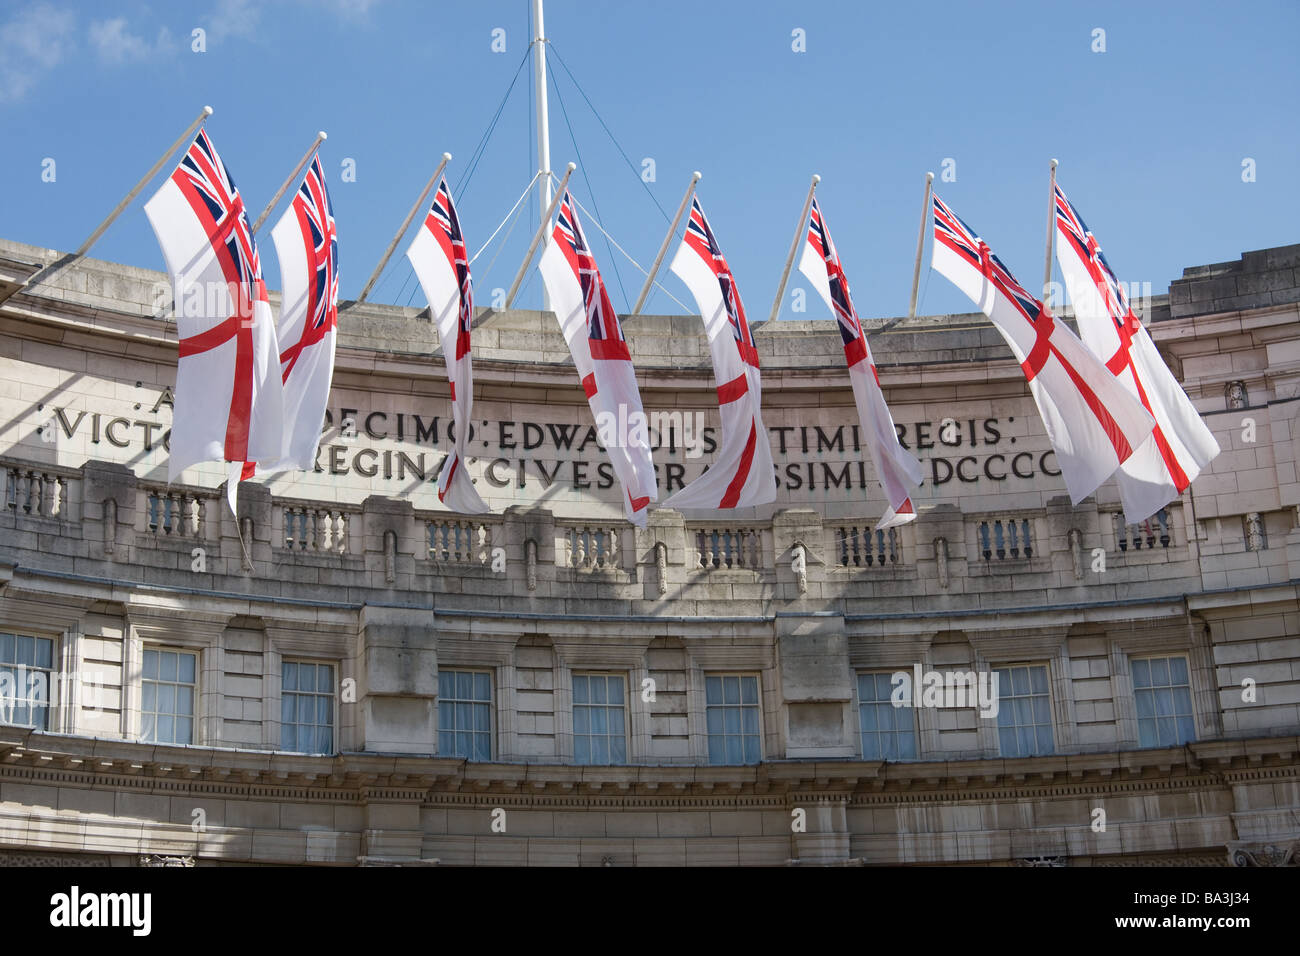 london england uk british white ensign navy naval flag entrance to the mall Stock Photo